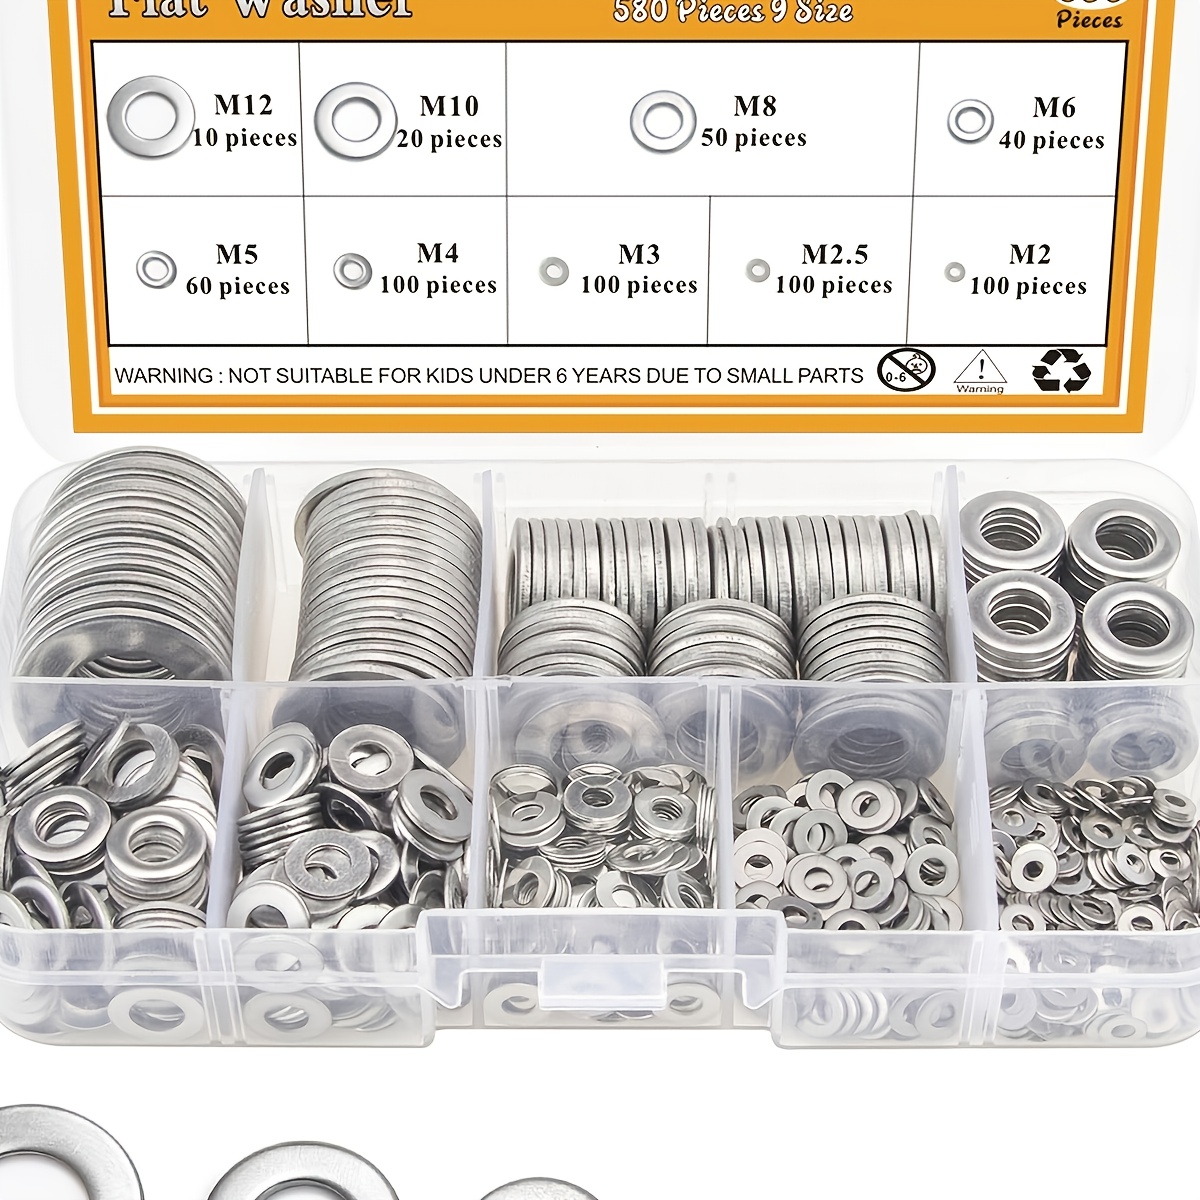 

180/360/580pcs 304 Stainless Steel Flat Washers Set - For Home Decor, Factory Repair, Kitchens, Shops & More